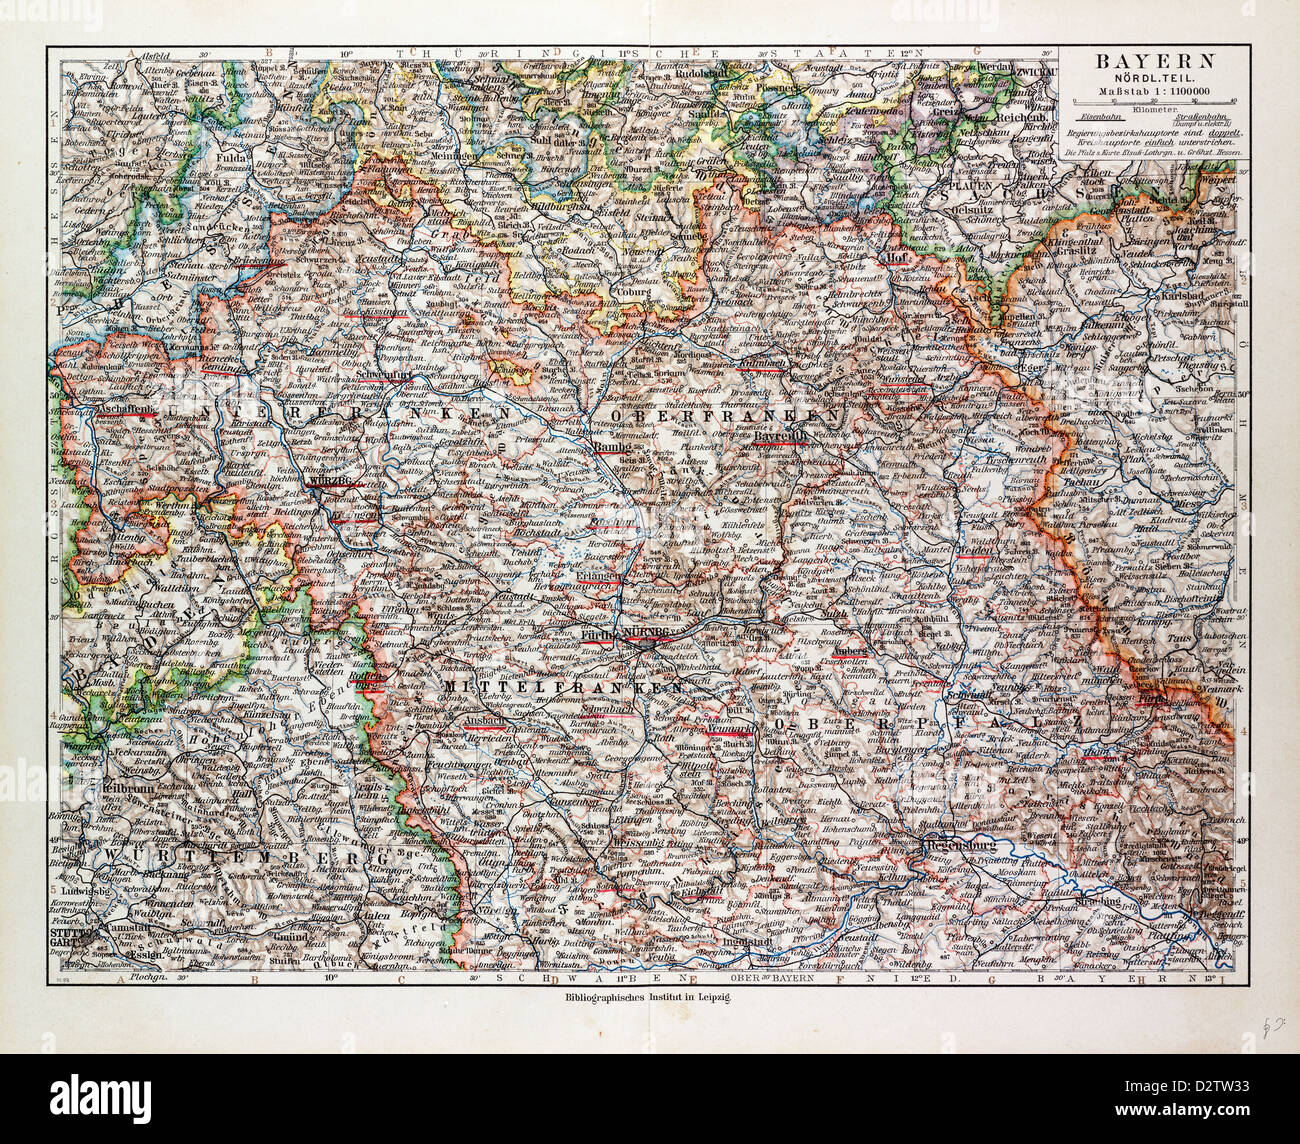 MAP OF THE NORTHERN PART OF BAVARIA GERMANY 1899 Stock Photo